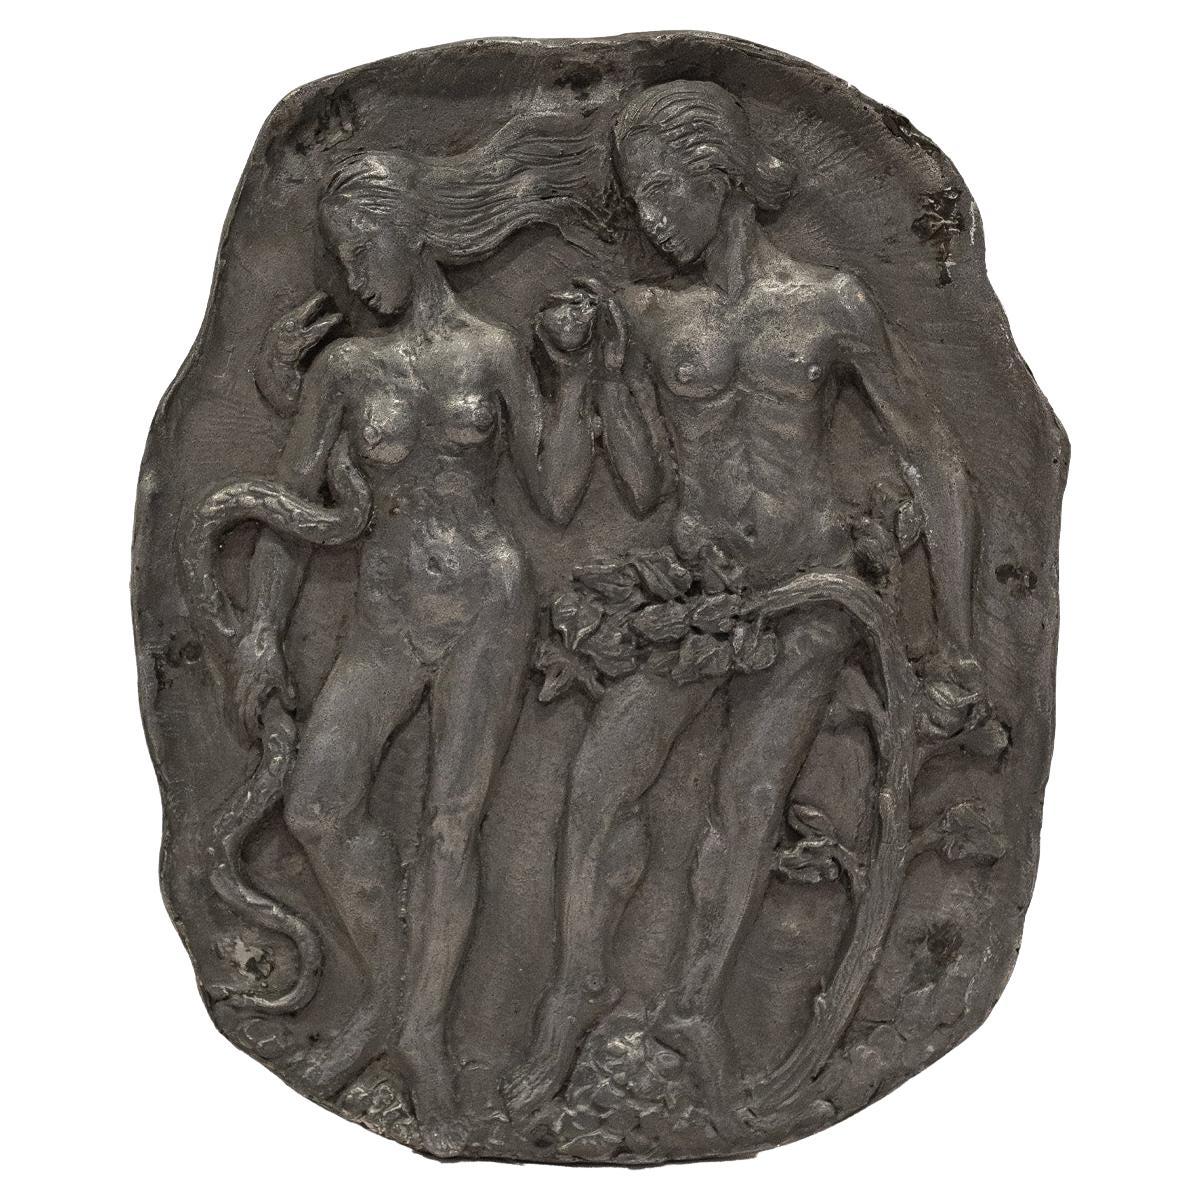 Philip and Kelvin LaVerne Rare "Adam and Eve" Wall Sculpture 1960s (Signed) For Sale